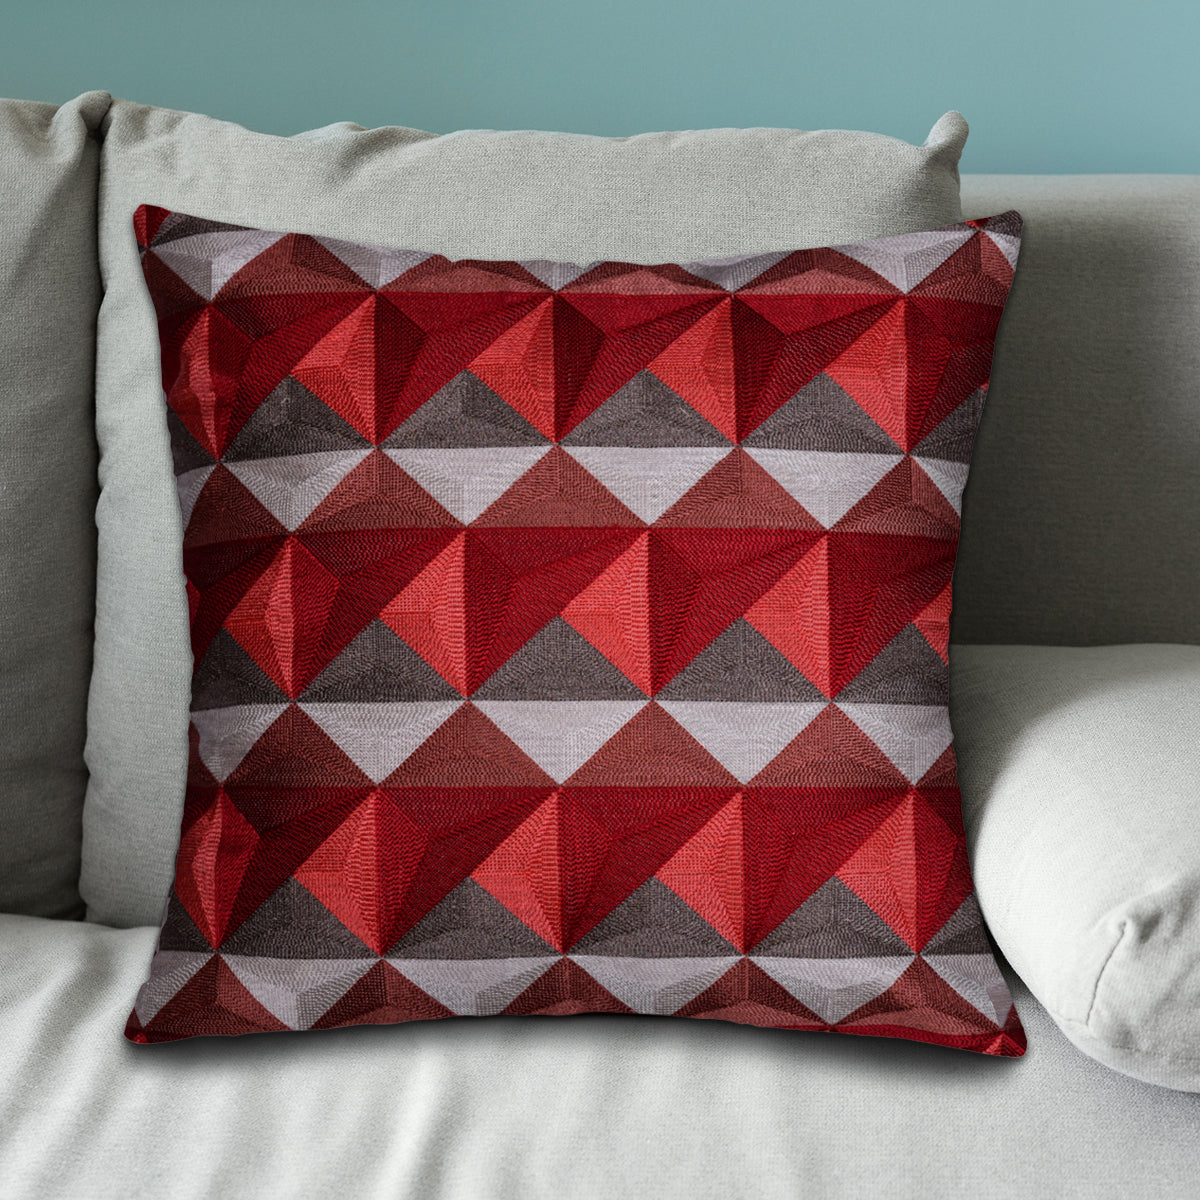 Red Gray Throw Pillow Covers - 20 x 20 inches - Decozen